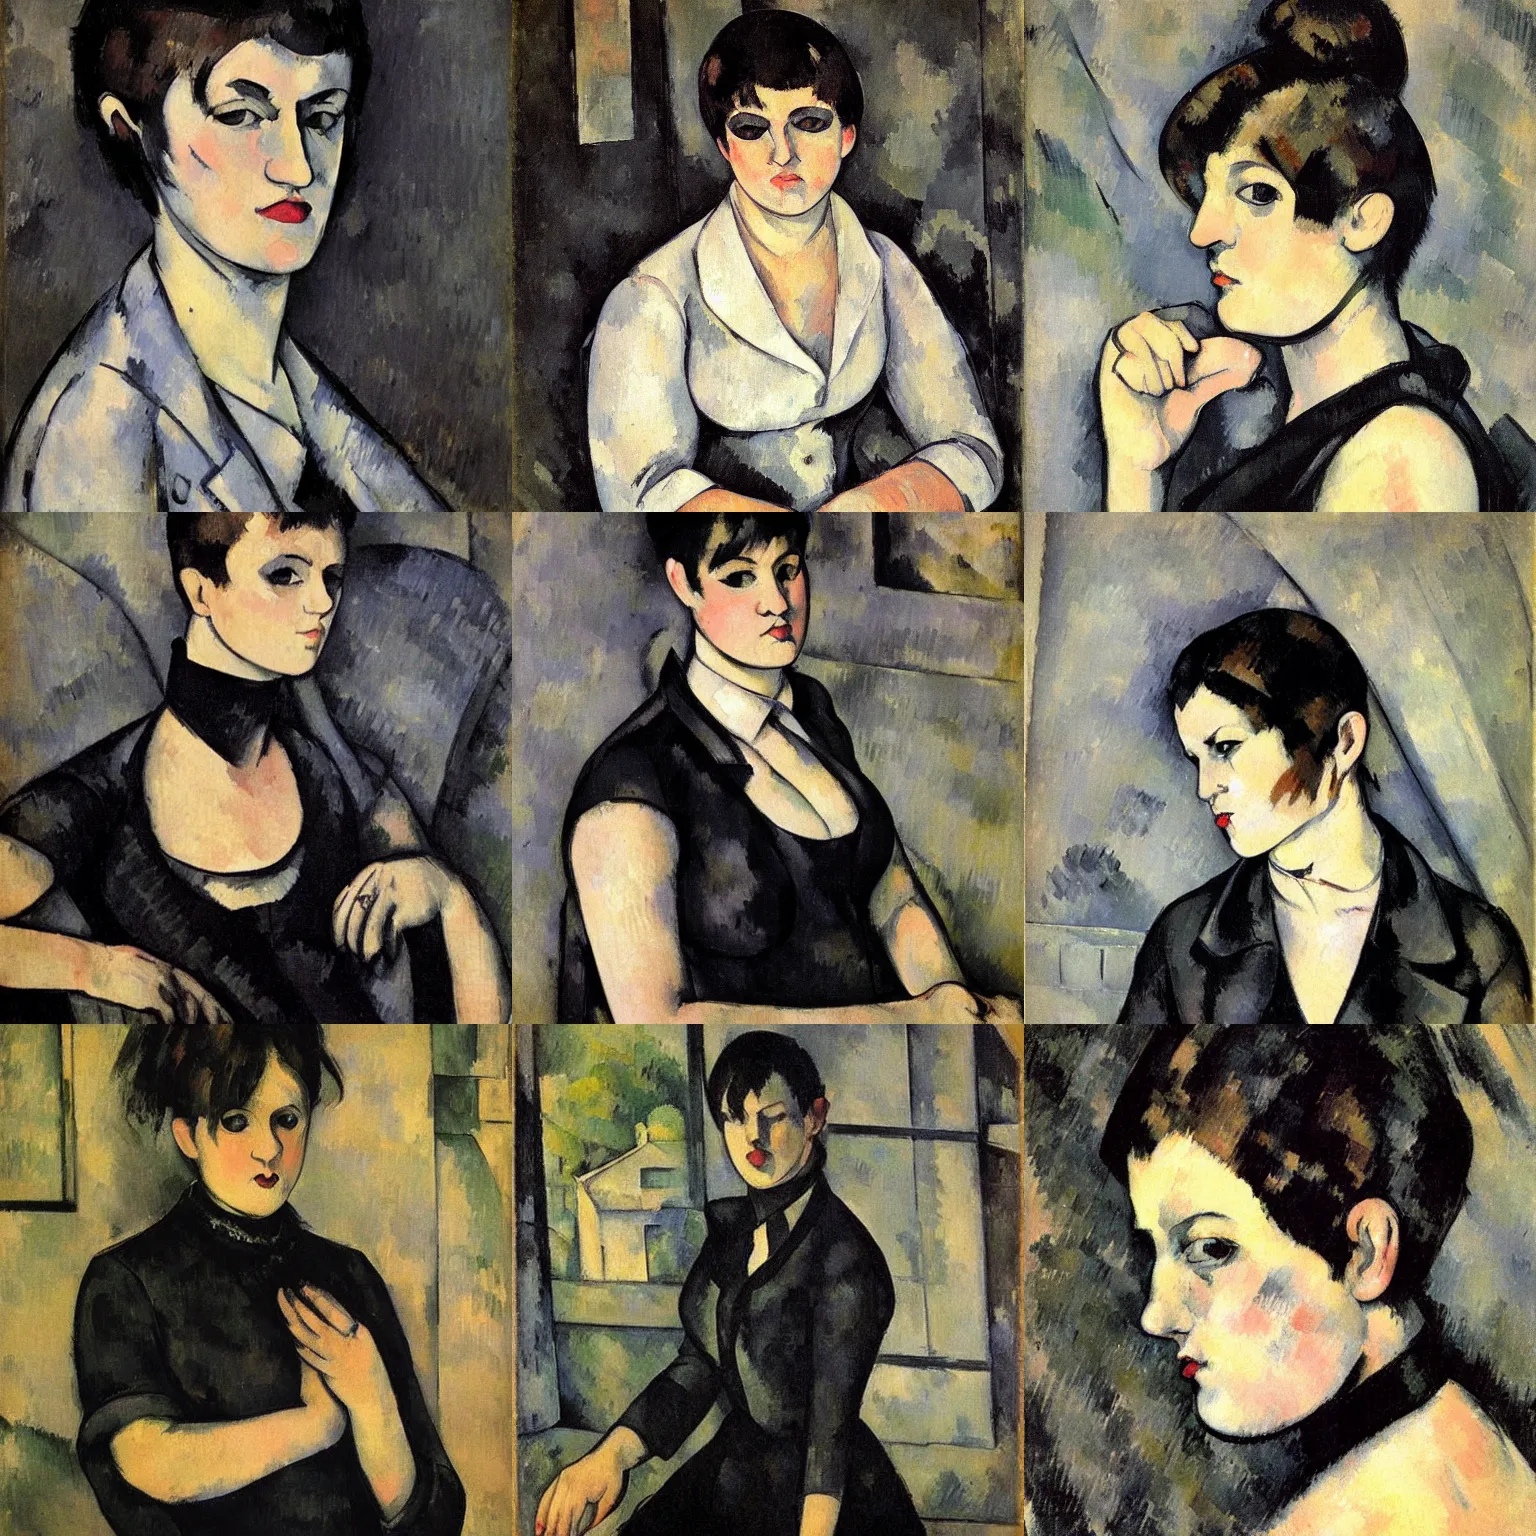 Prompt: A goth portrait painted by Paul Cezanne. Her hair is dark brown and cut into a short, messy pixie cut. She has a slightly rounded face, with a pointed chin, large entirely-black eyes, and a small nose. She is wearing a black tank top, a black leather jacket, a black knee-length skirt, a black choker, and black leather boots.